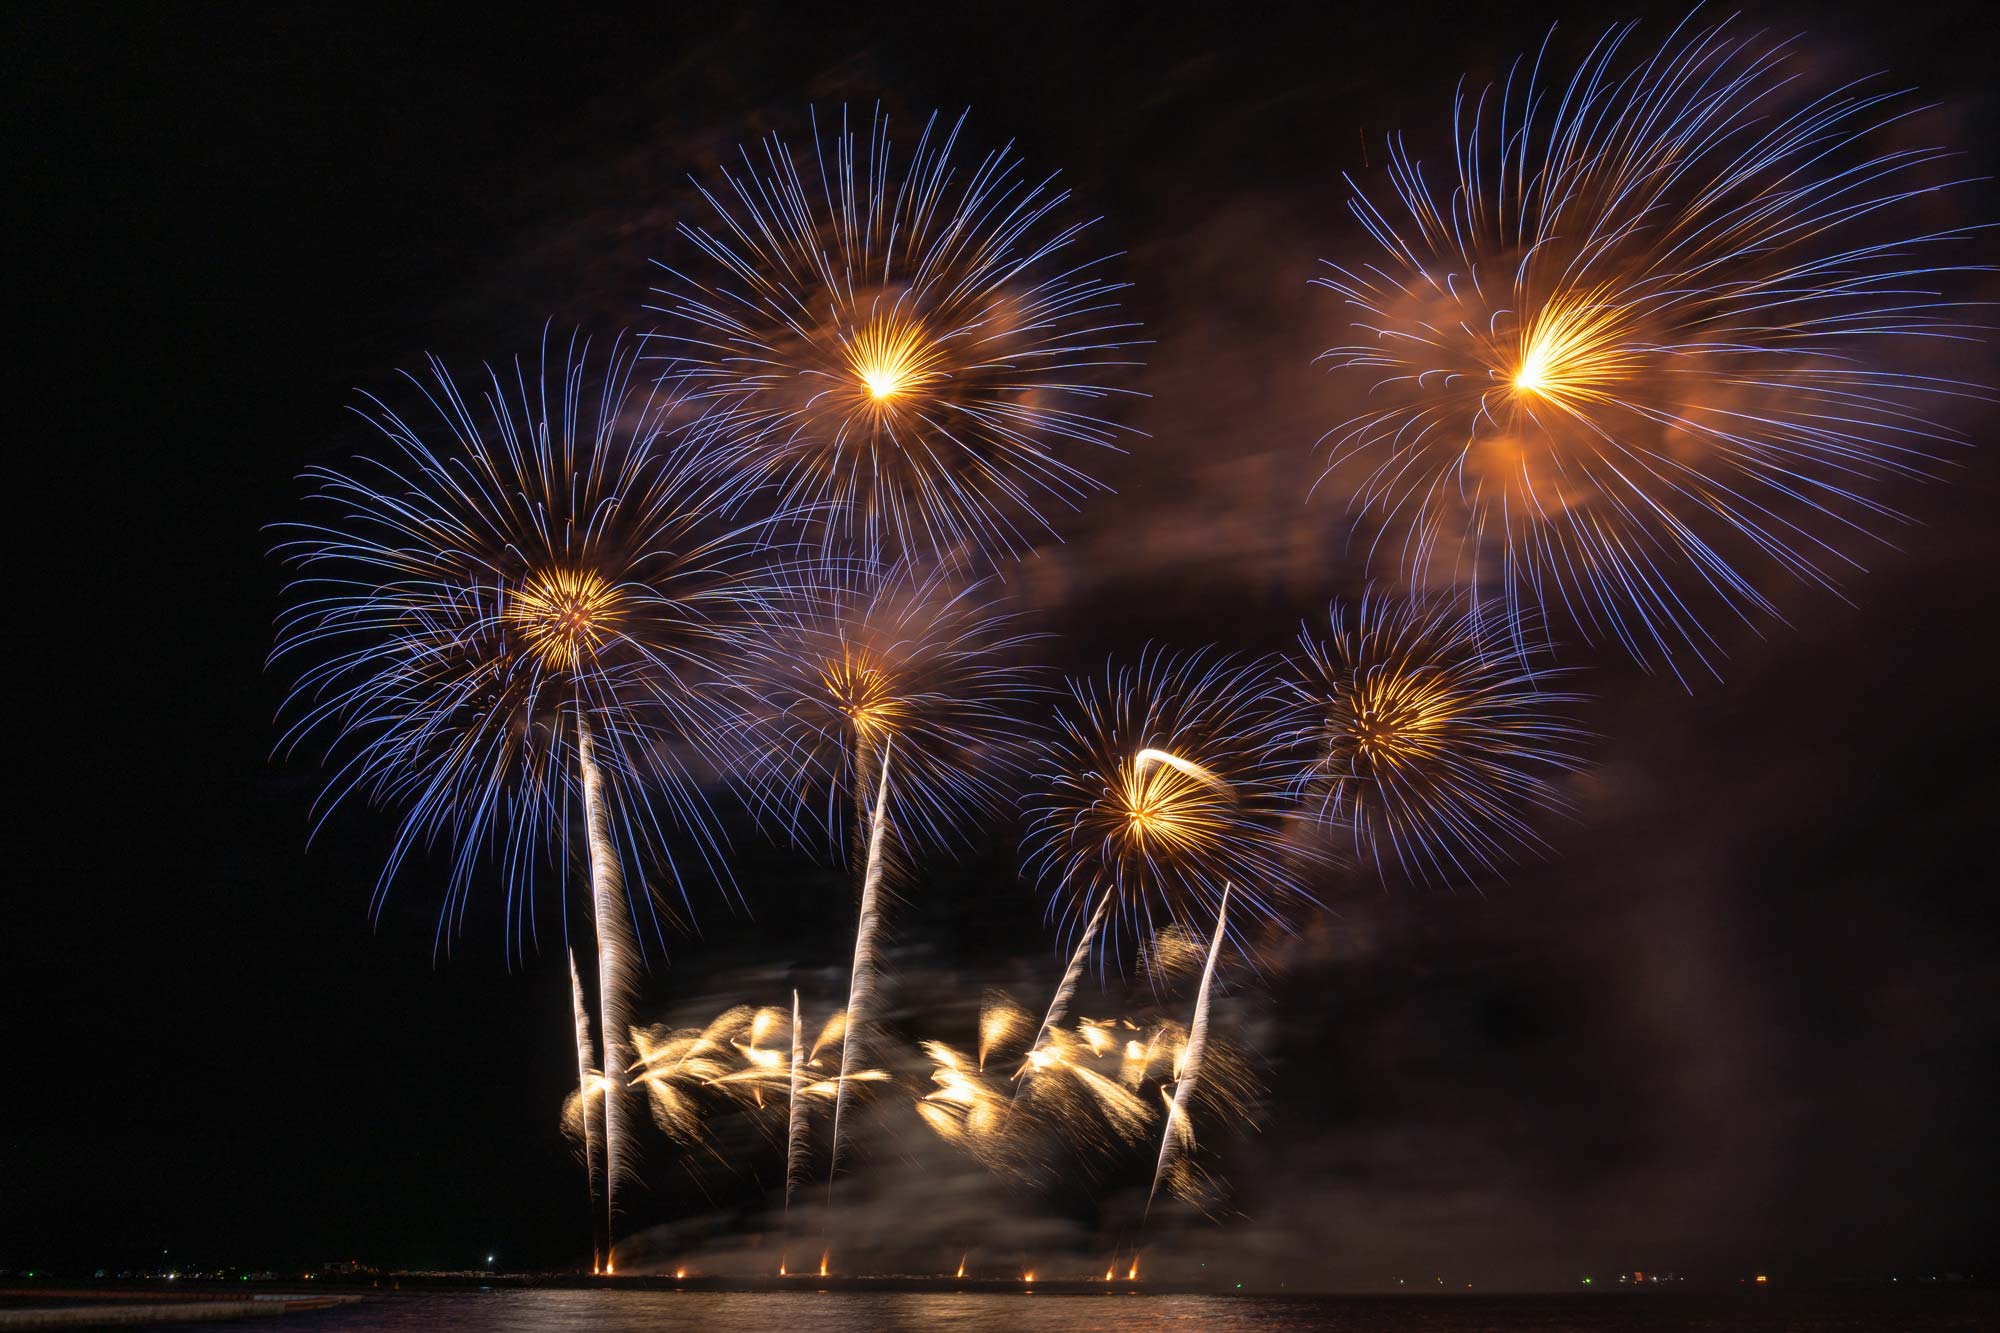 Fireworks at Sea Event Rescheduled After Weather Woes